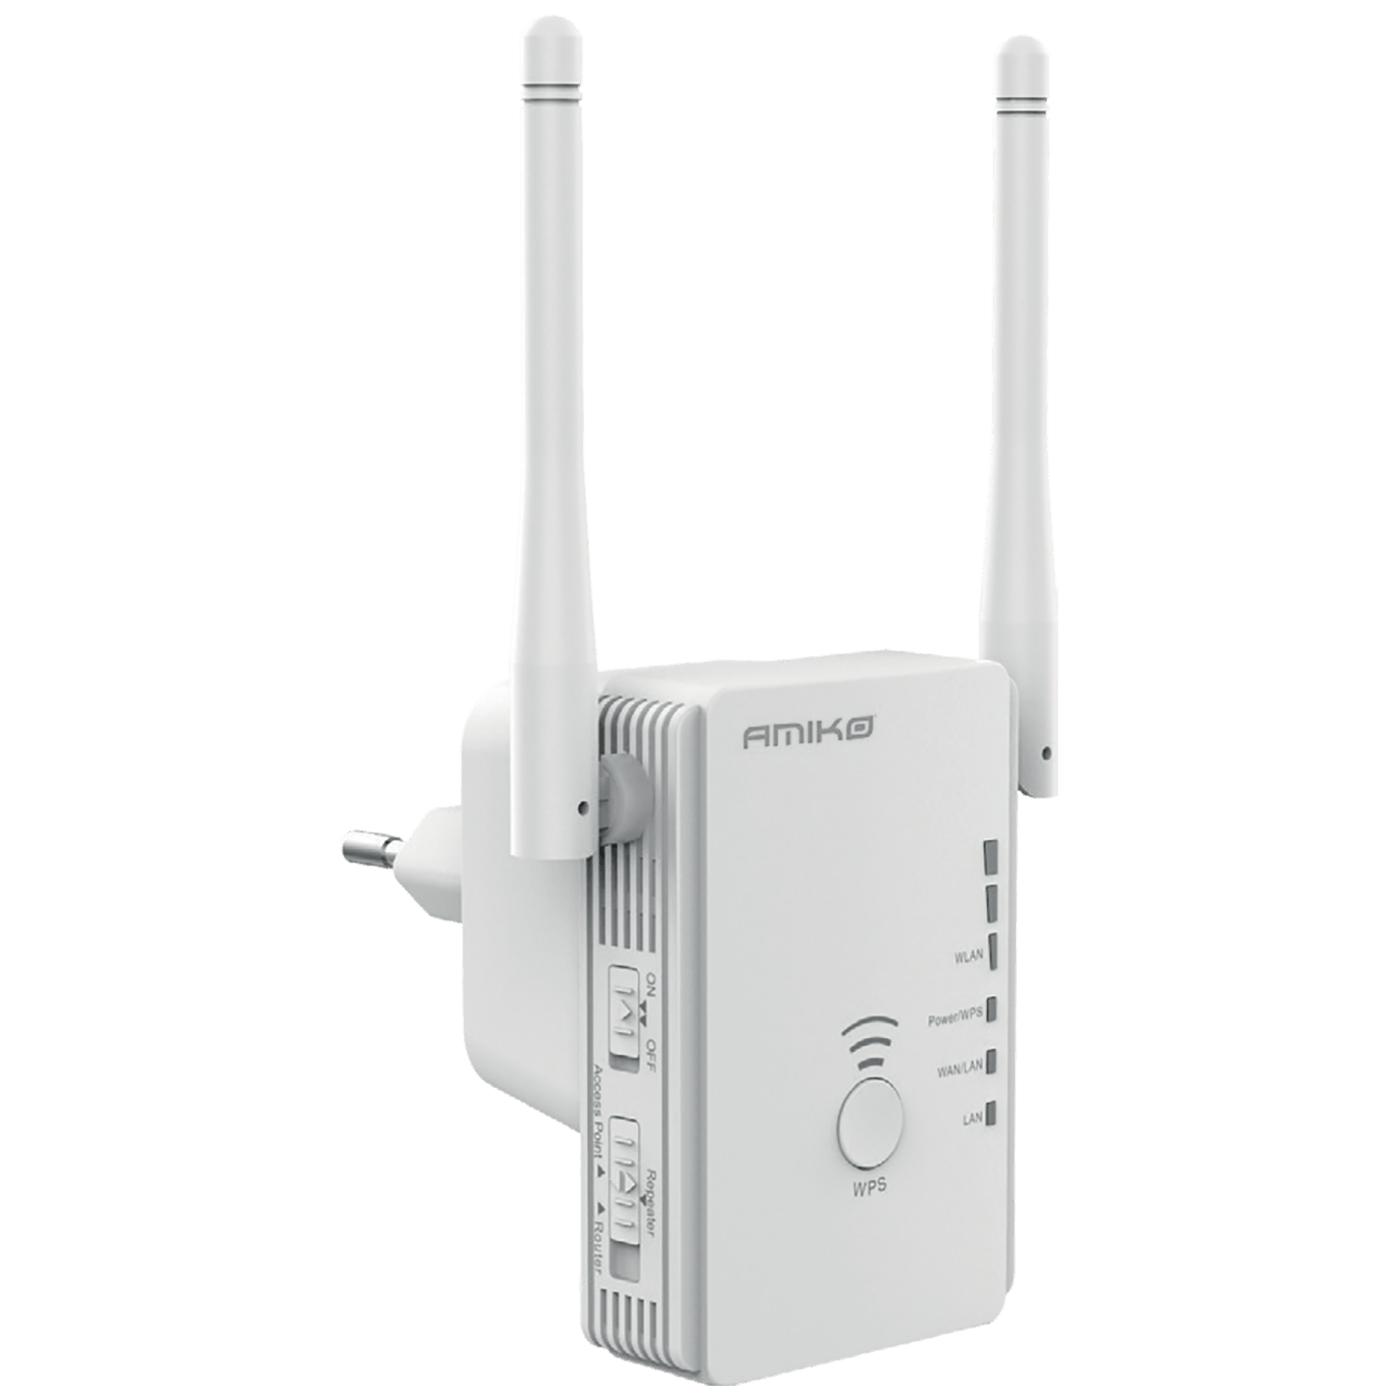 Wireless N AP/Router/Repeater, 300Mbps, 20dBm, 2.4 GHz